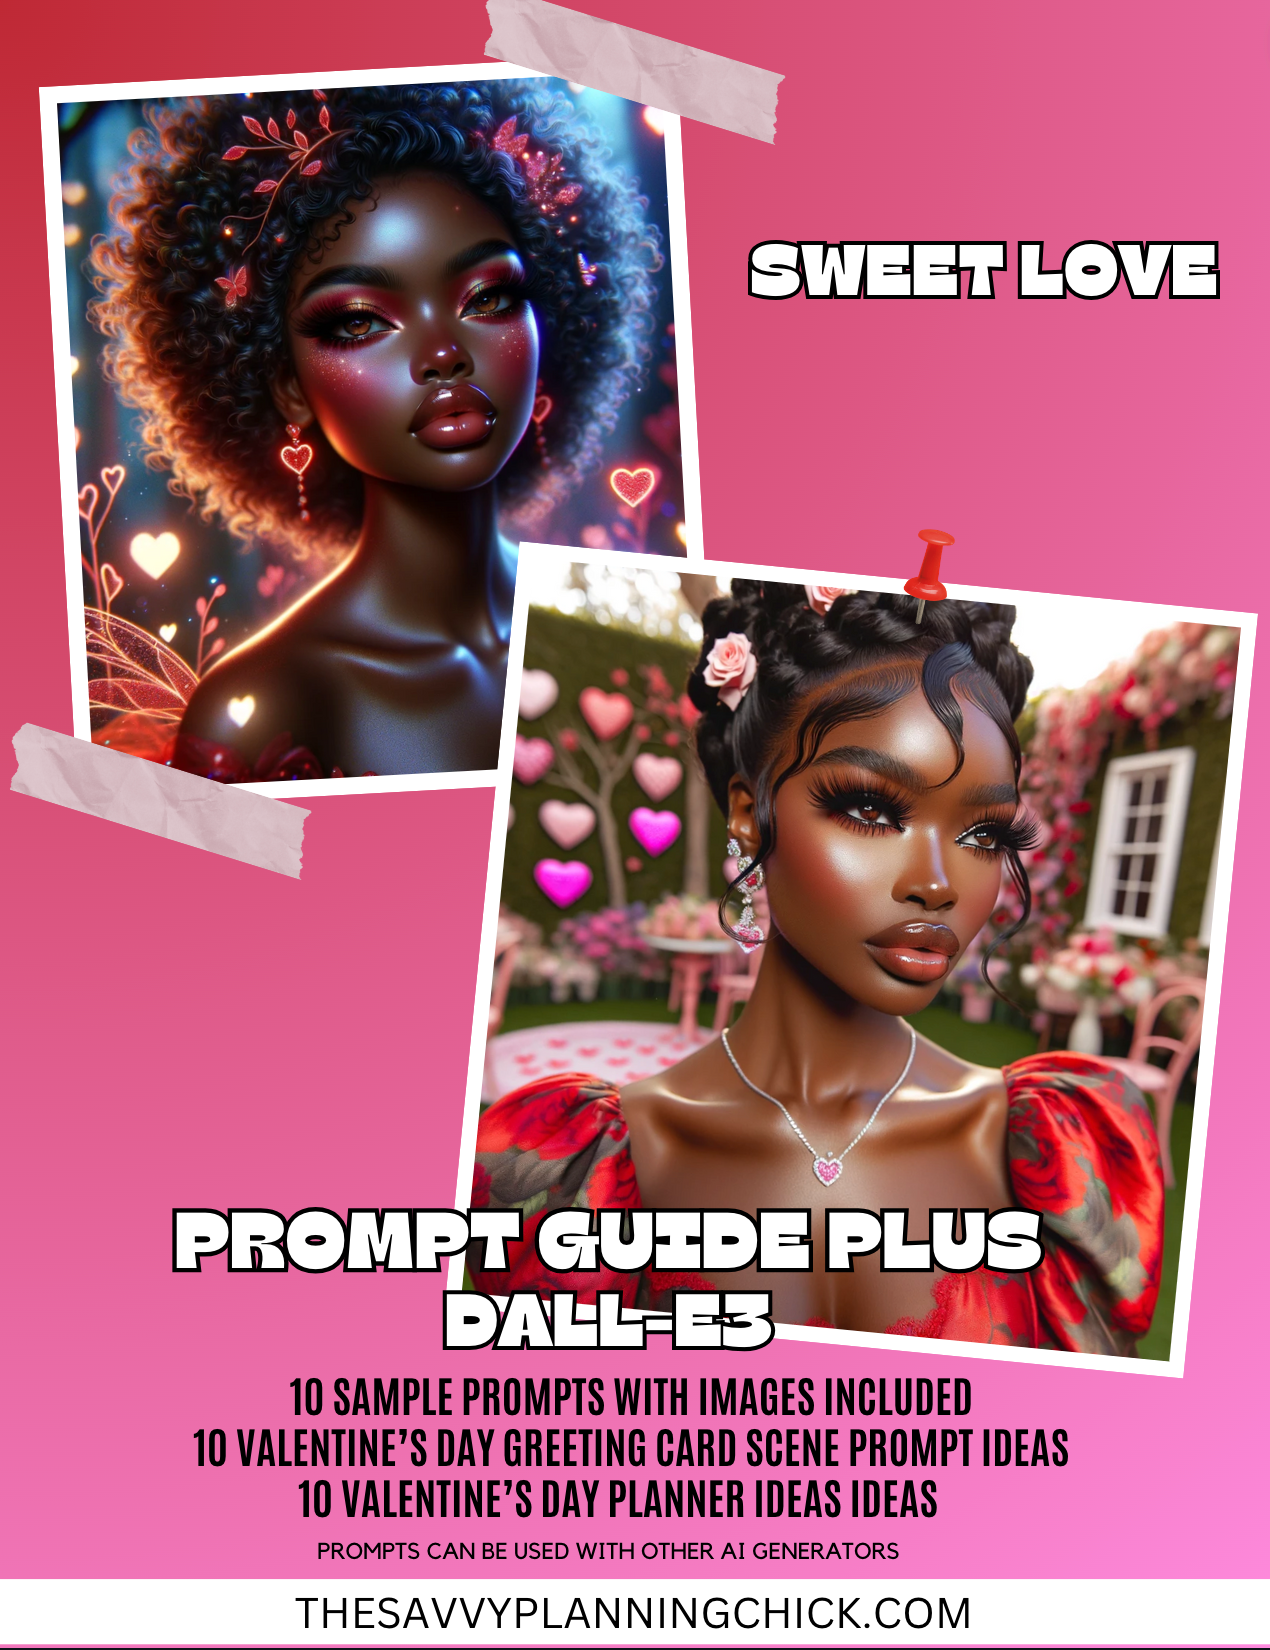 SWEET LOVE PROMPT GUIDE PLUS